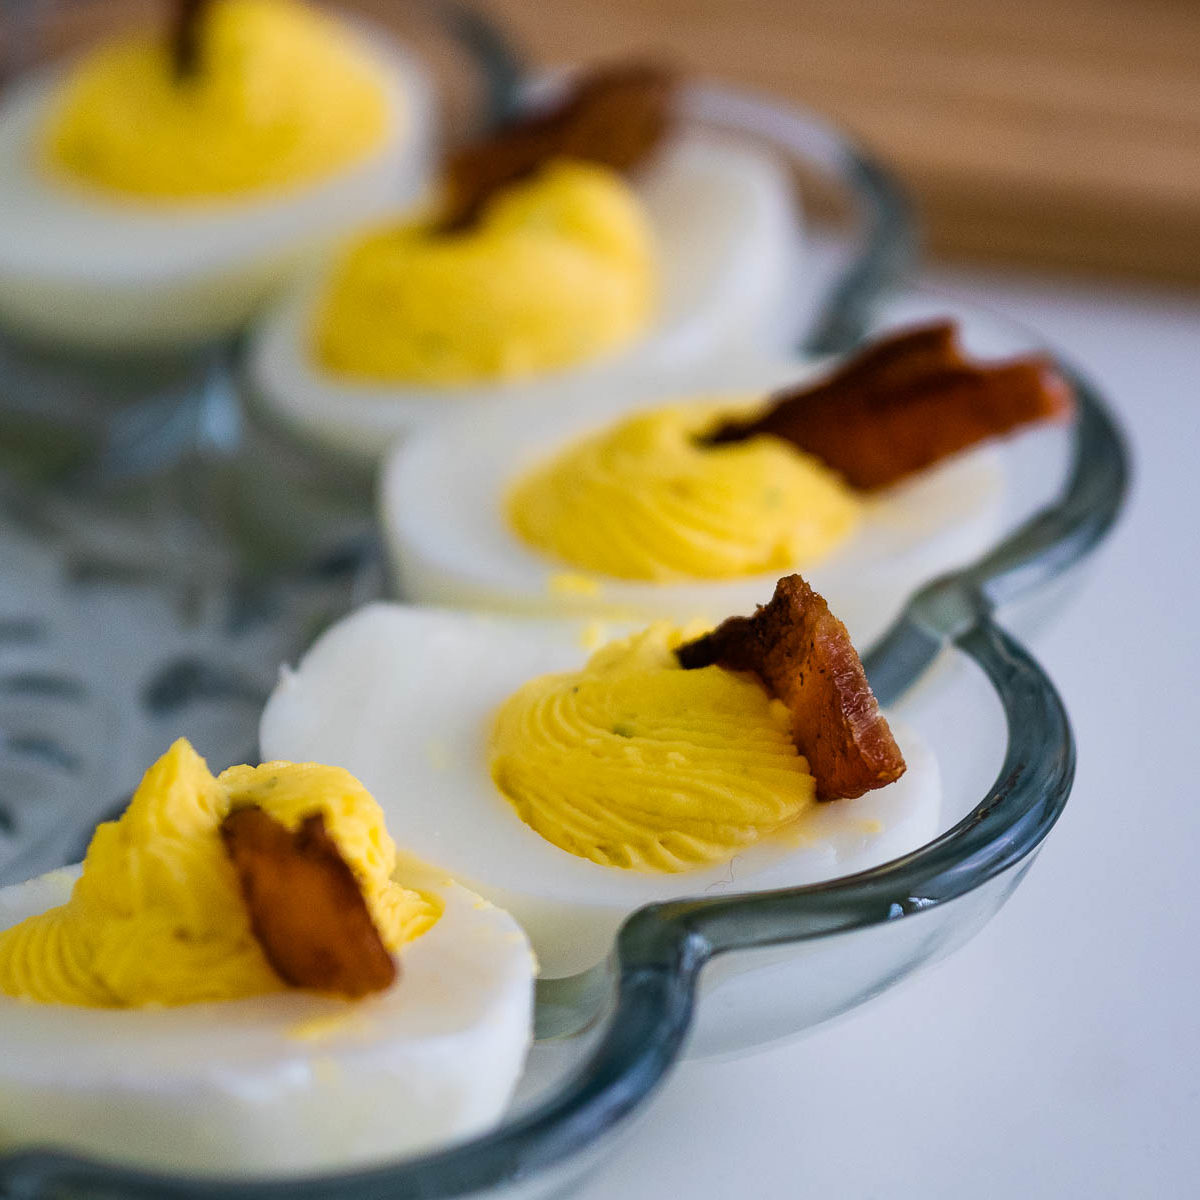 Deviled eggs with bacon in a glass deviled egg platter.